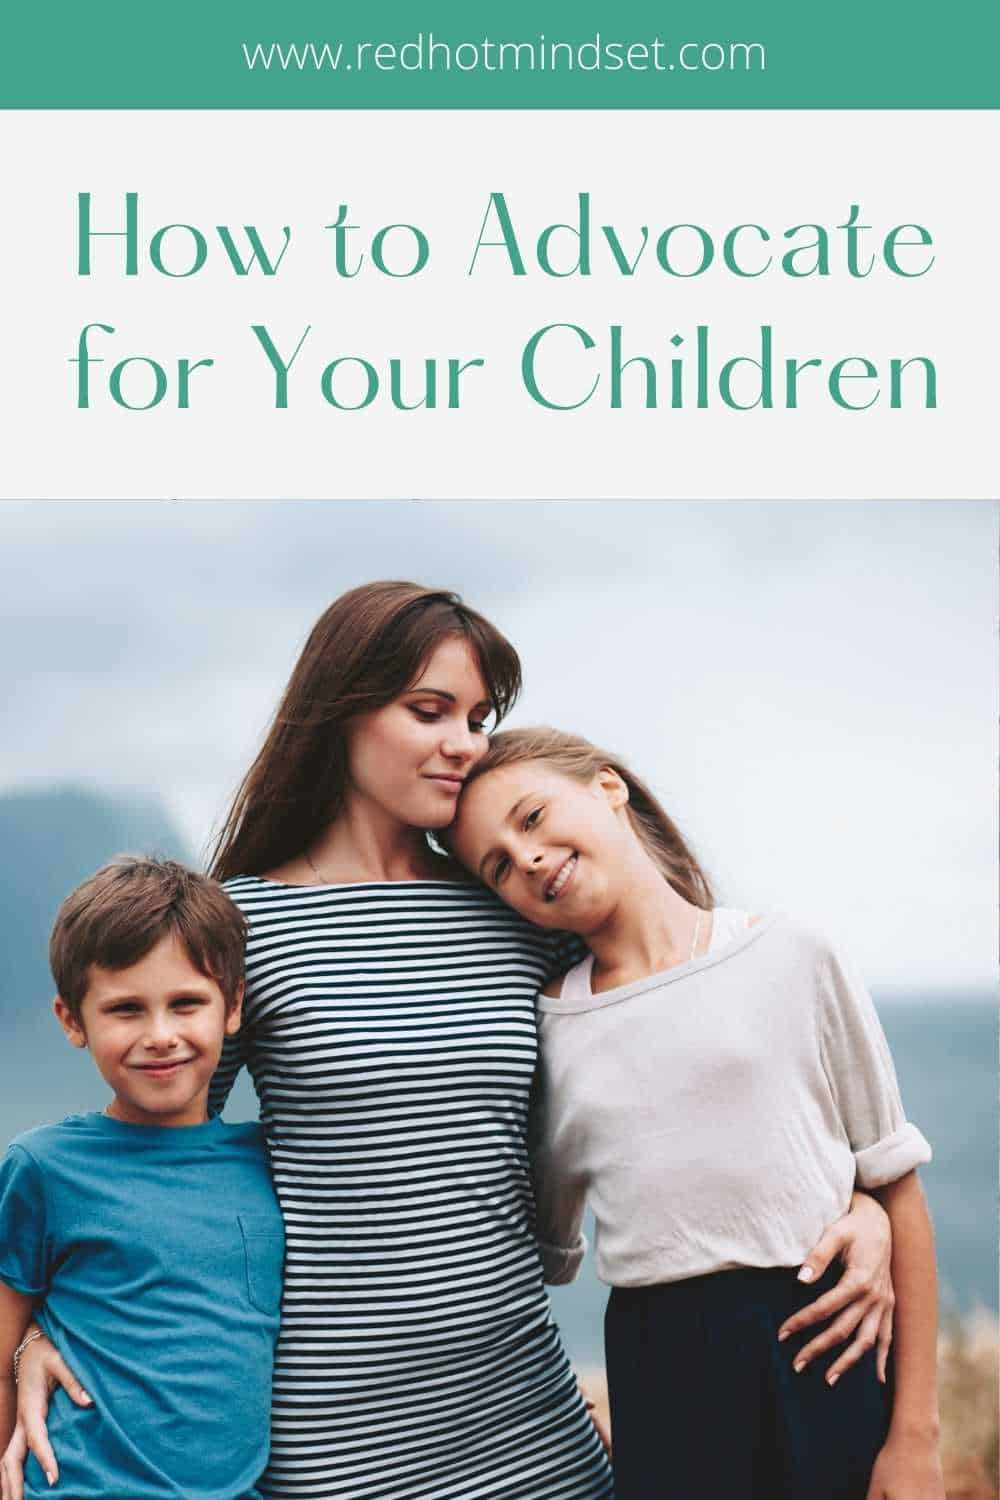 Why Advocating for Your Children Matters